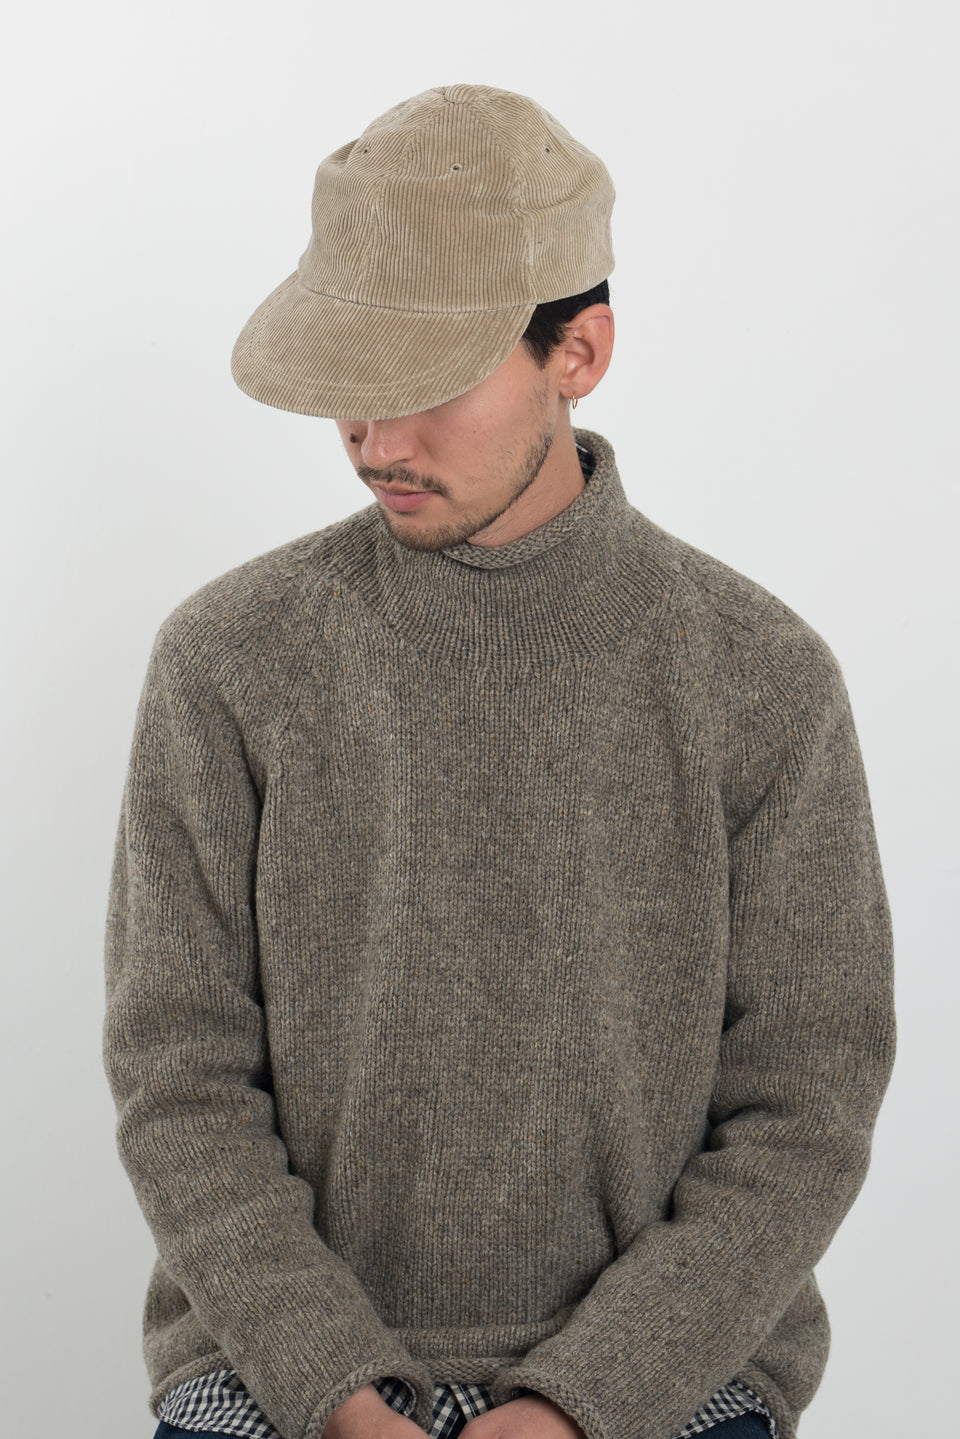 ENDS and MEANS FW22 Japan EM-ST-H03 Cord 6 Panel Cap Beige Calculus Victoria BC Canada